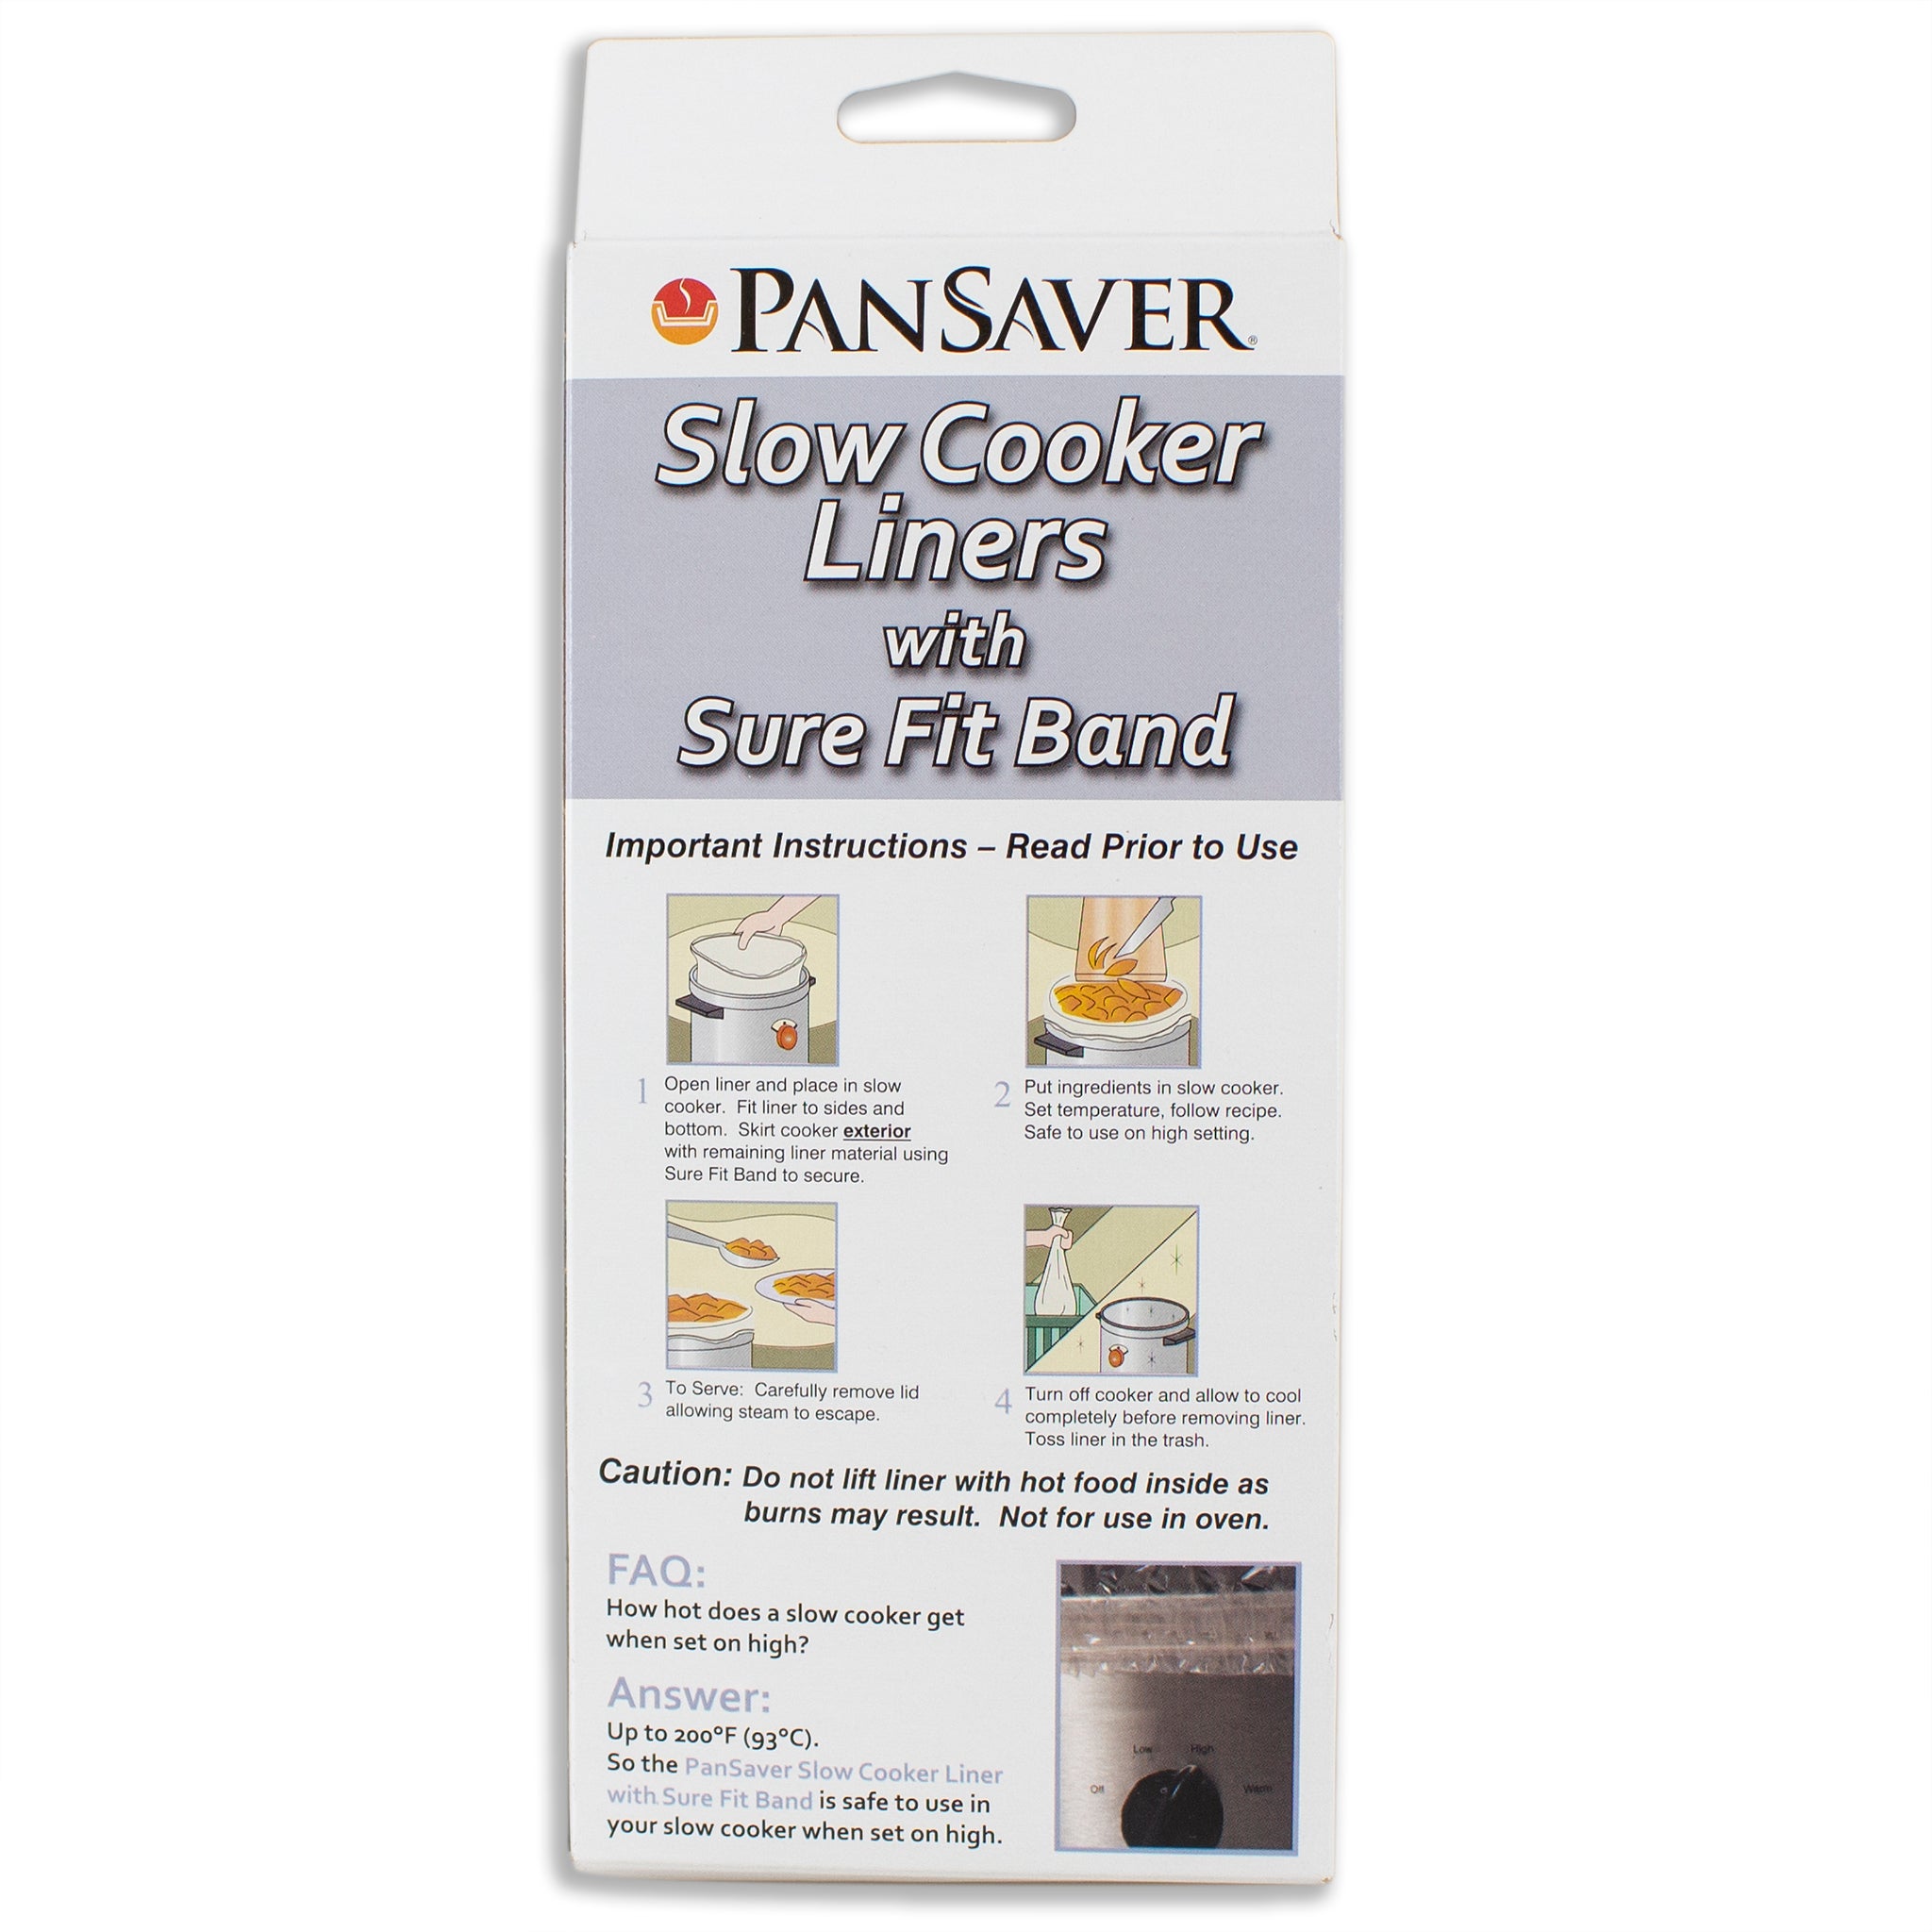 Pan Liners, PanSaver Ovenable Pan Liners for Cooking - Pansaver